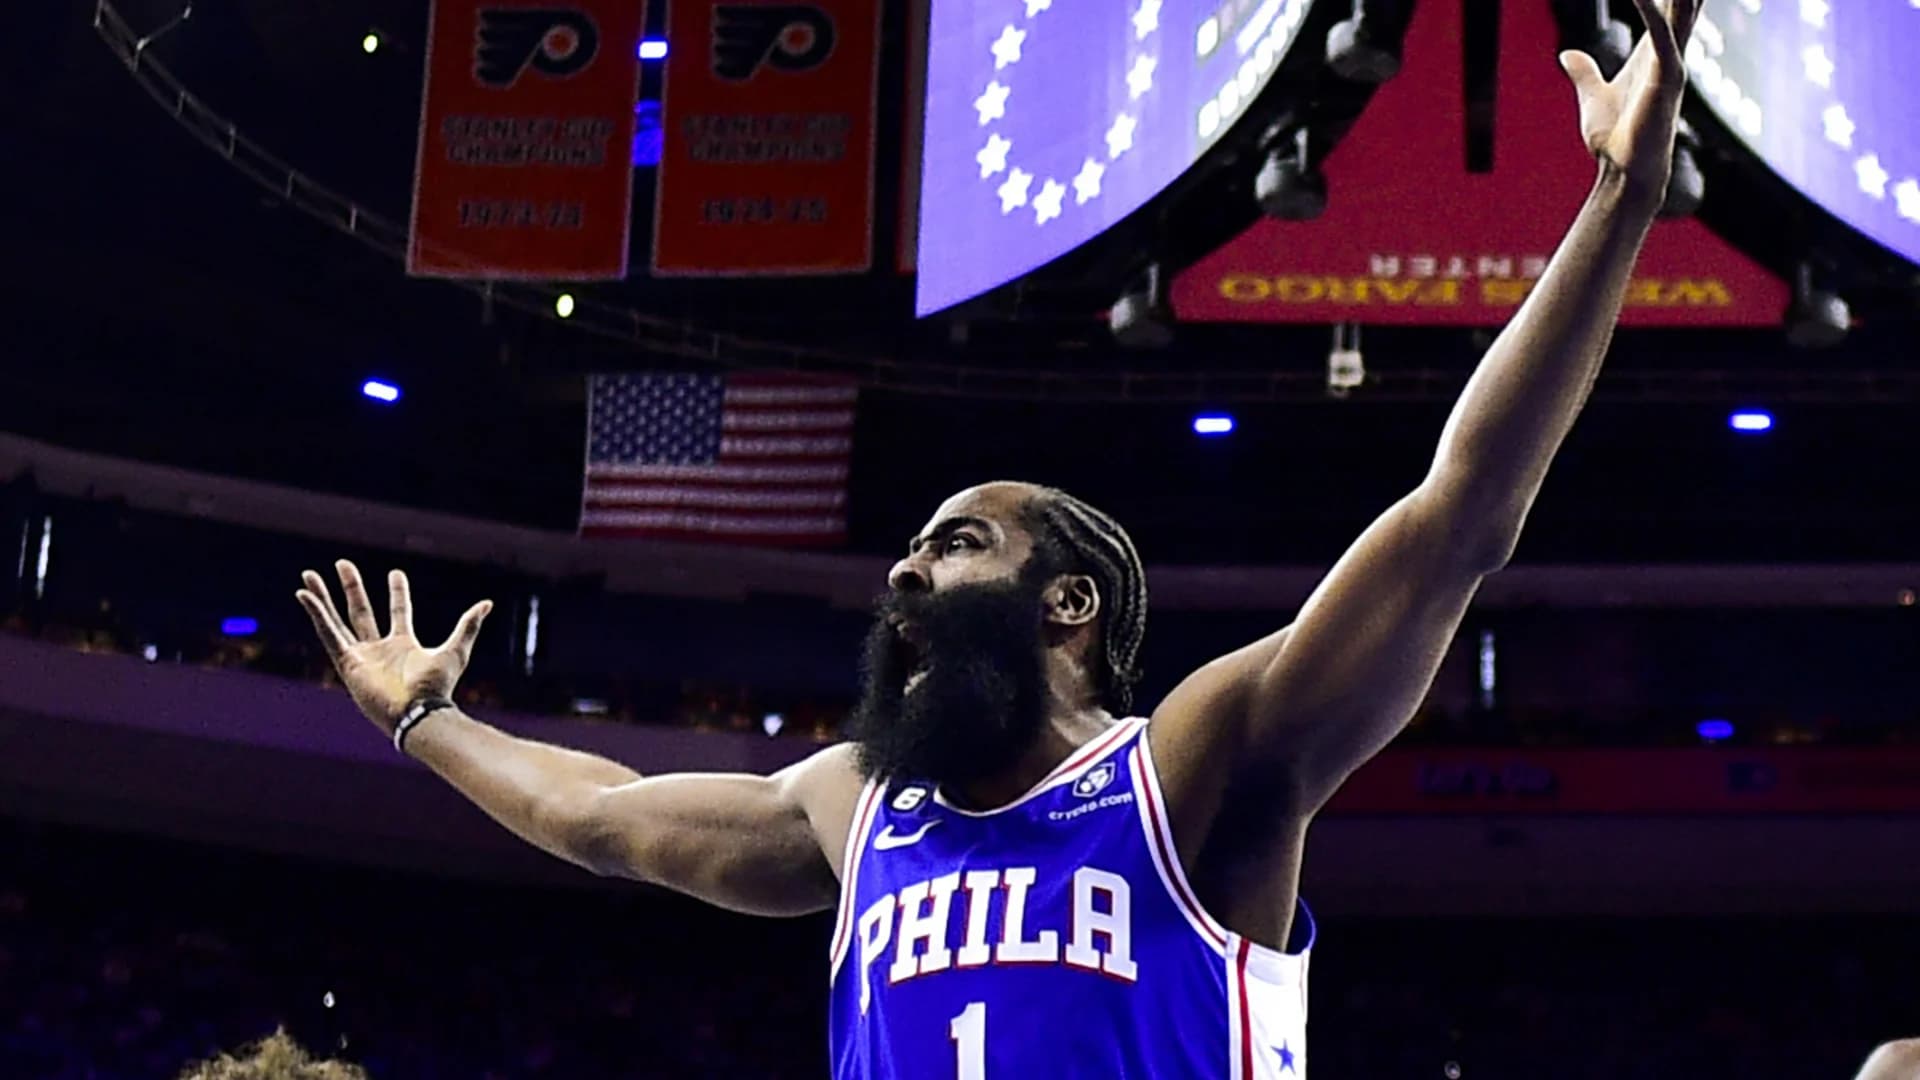 James Harden calls 76ers President Daryl Morey a liar and says he won't play for his team